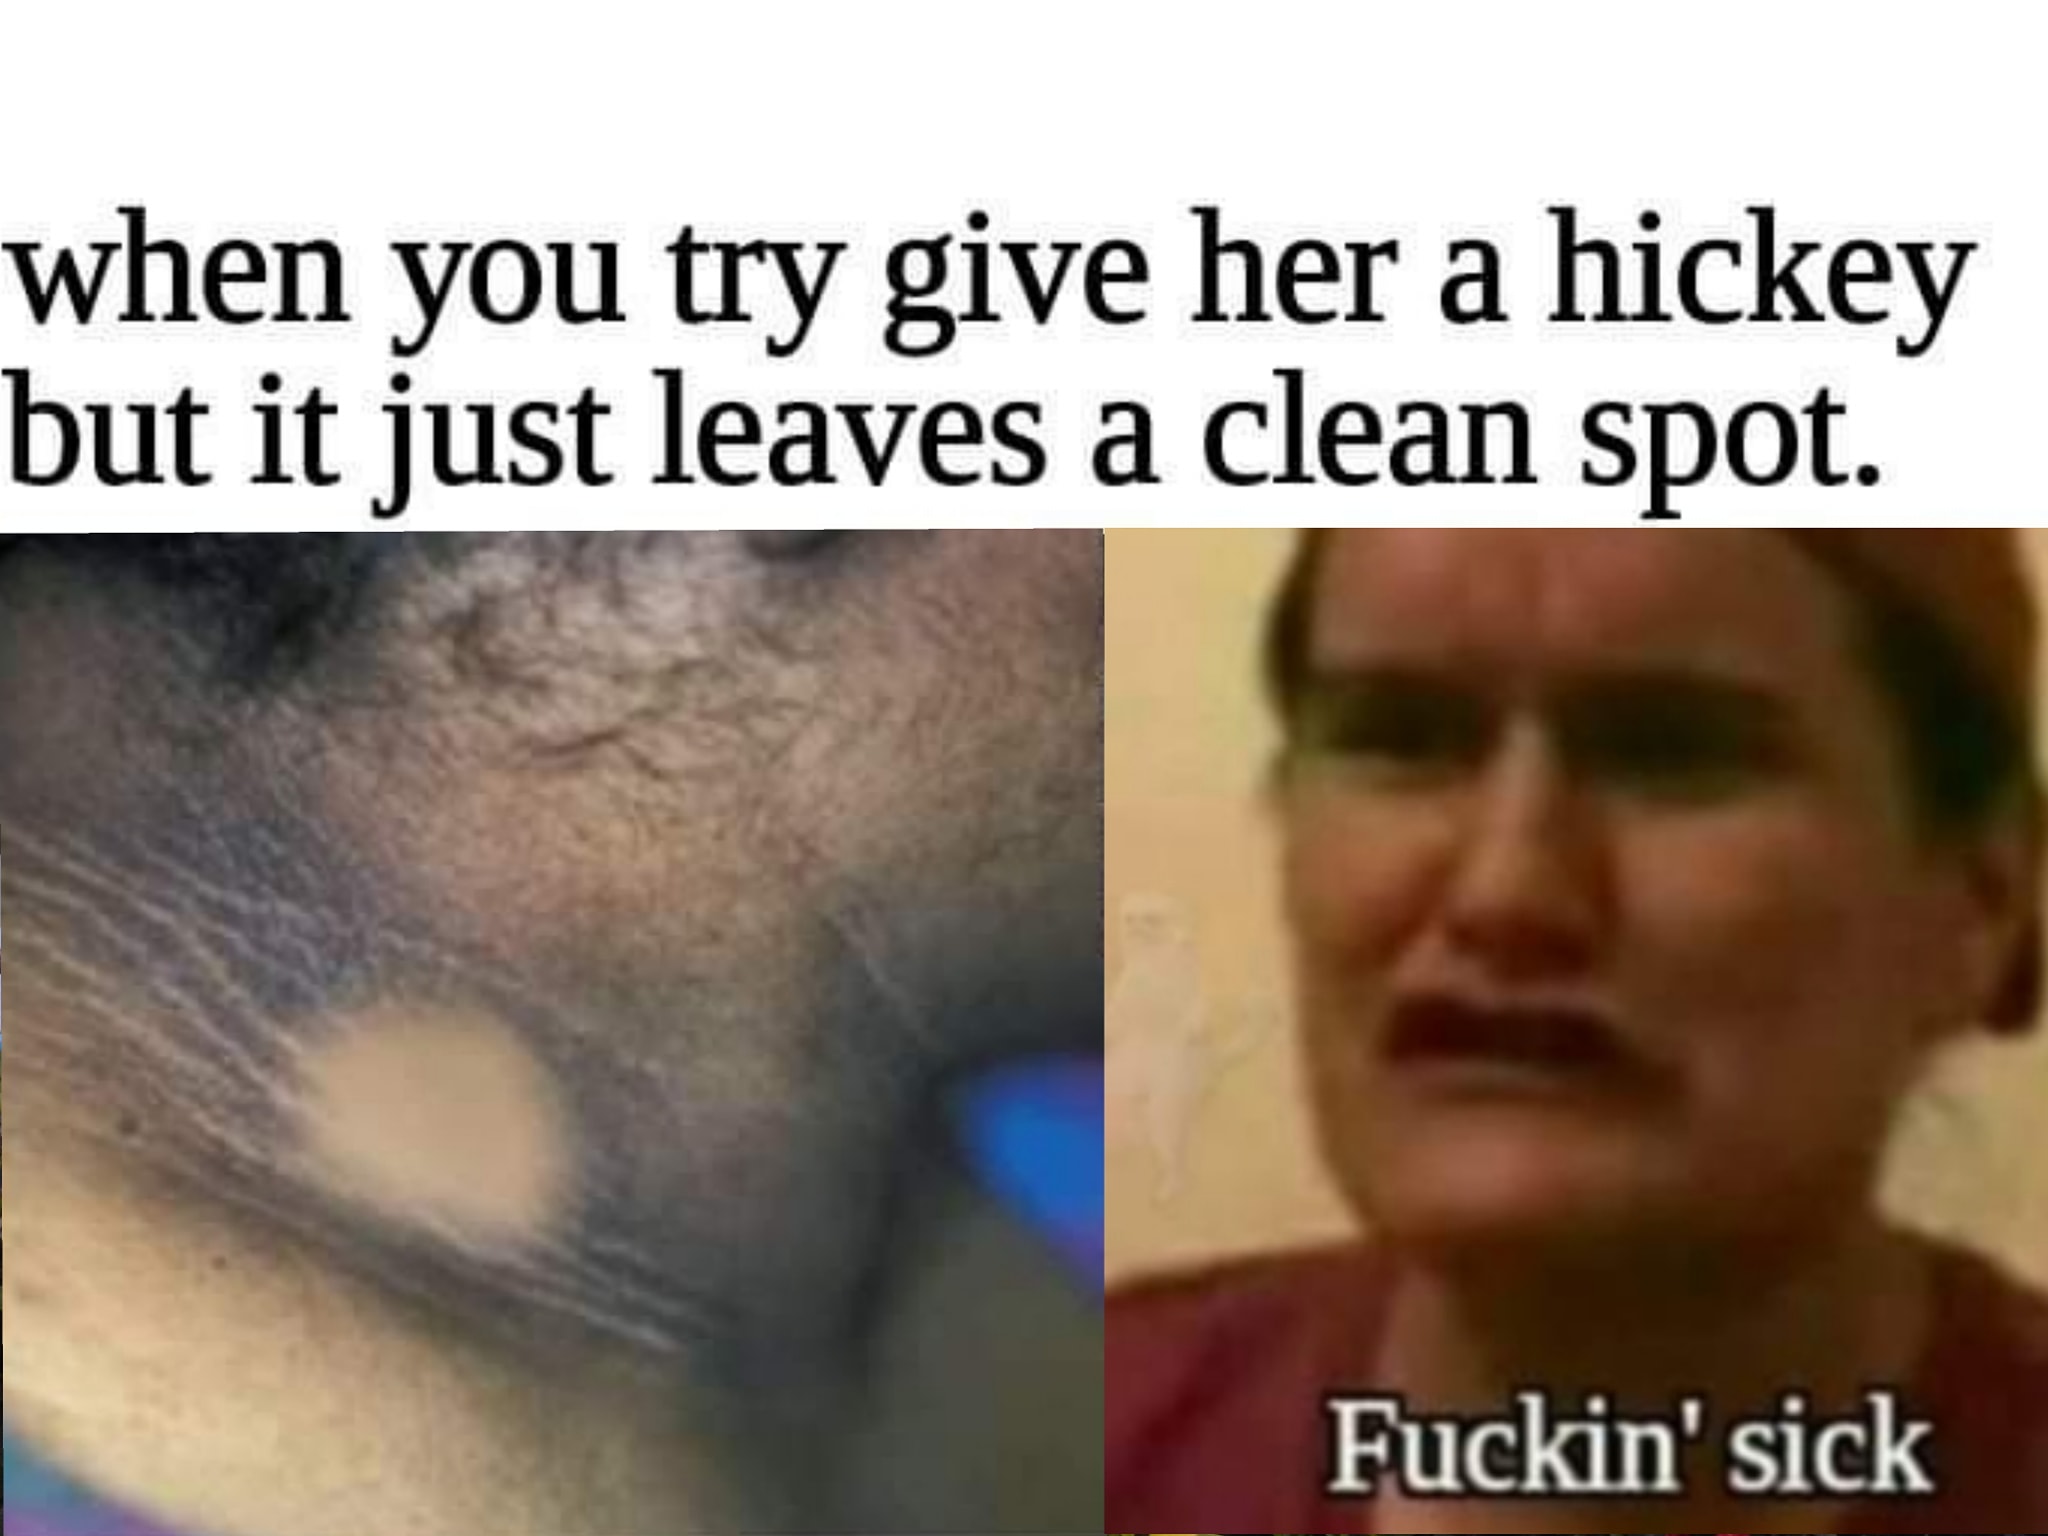 jaw - when you try give her a hickey but it just leaves a clean spot. Fuckin' sick